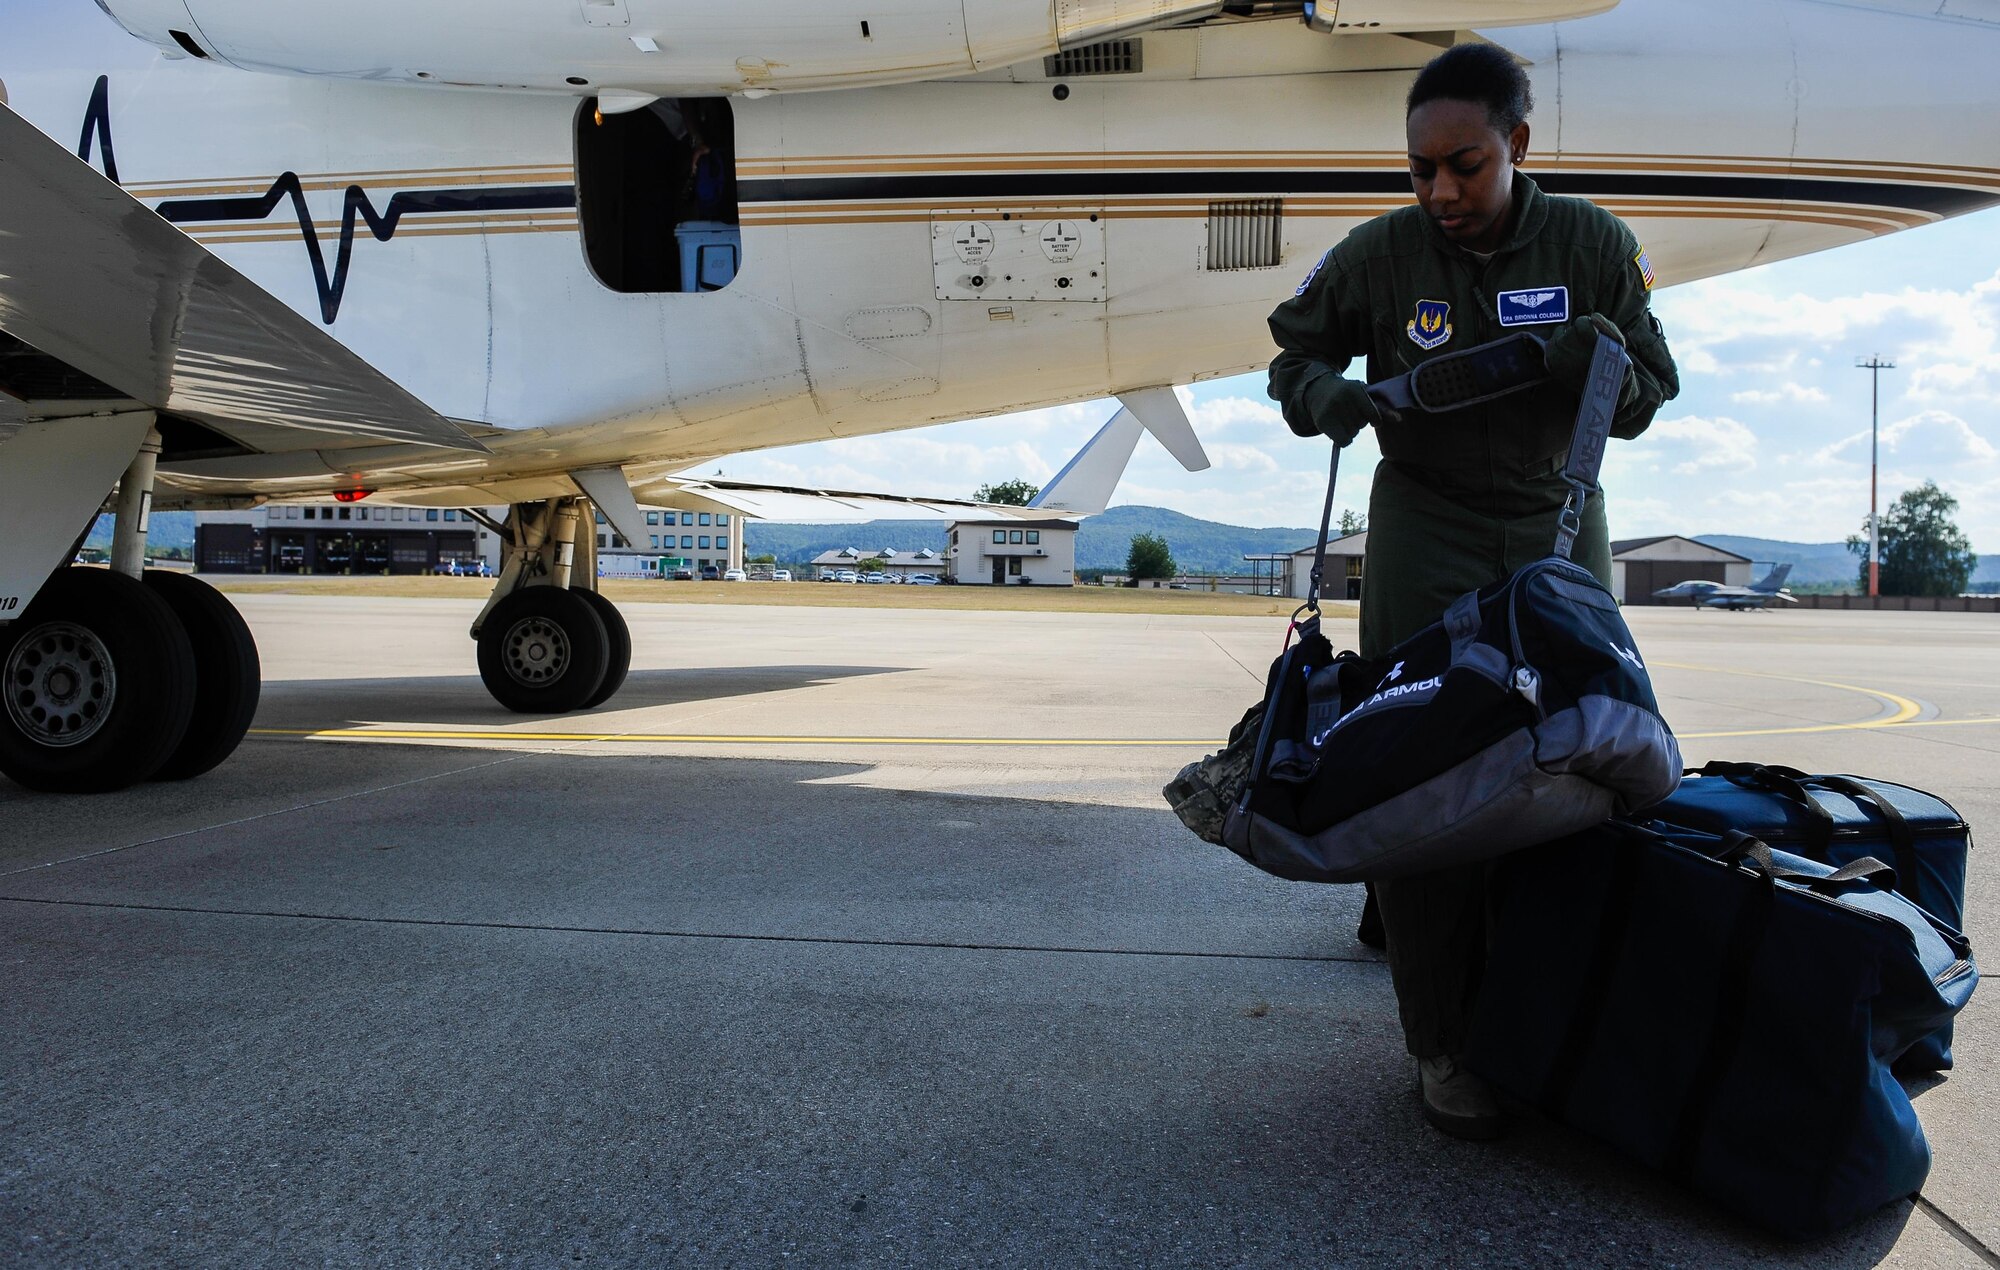 Senior Airman Brionna Coleman, 86th Aeromedical Evacuation Squadron mission launch aeromedical evacuation technician, transports bags between a Gulfstream III and an ambulance during an aeromedical evacuation mission Sept. 1, 2016, at Ramstein Air Base, Germany. Providing essential care in multiple medical roles, Aerospace Medical Service specialists assist doctors and care for patients in a wide range of situations. (U.S. Air Force photo/Airman 1st Class Lane T. Plummer)